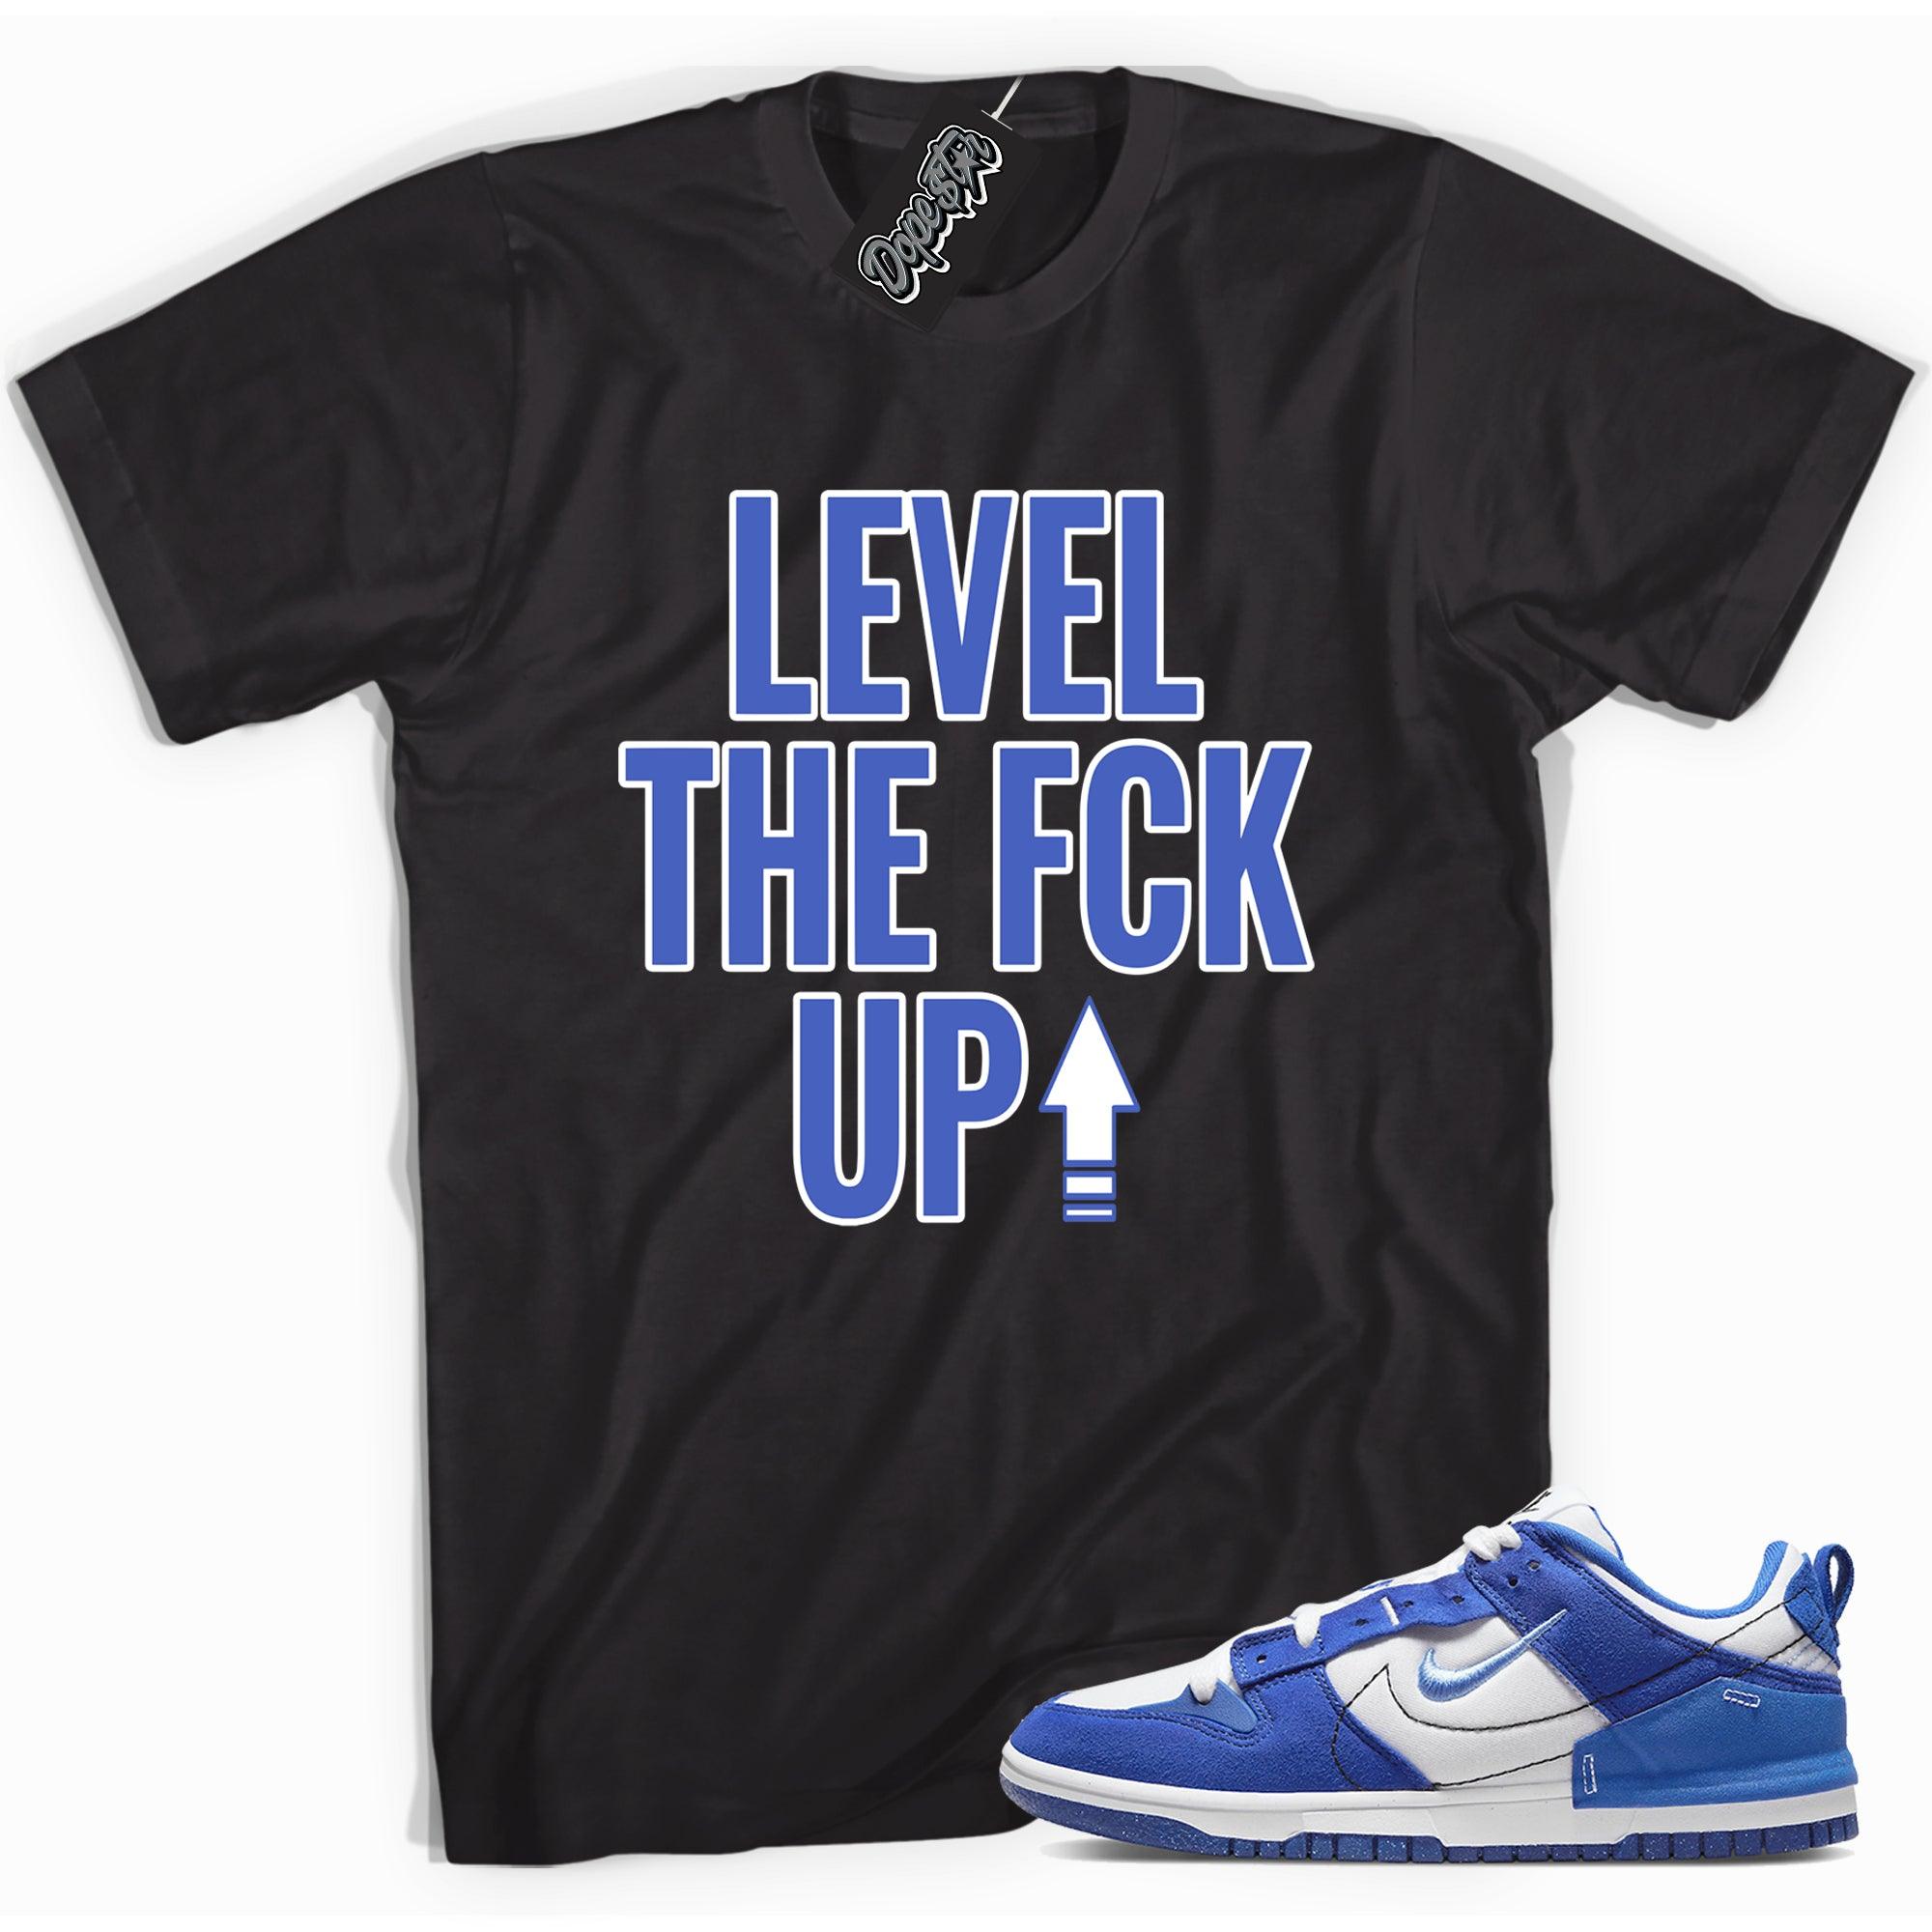 Cool black graphic tee with 'Level Up' print, that perfectly matches Nike Dunk Low Disrupt 2 Hyper Royal sneakers.